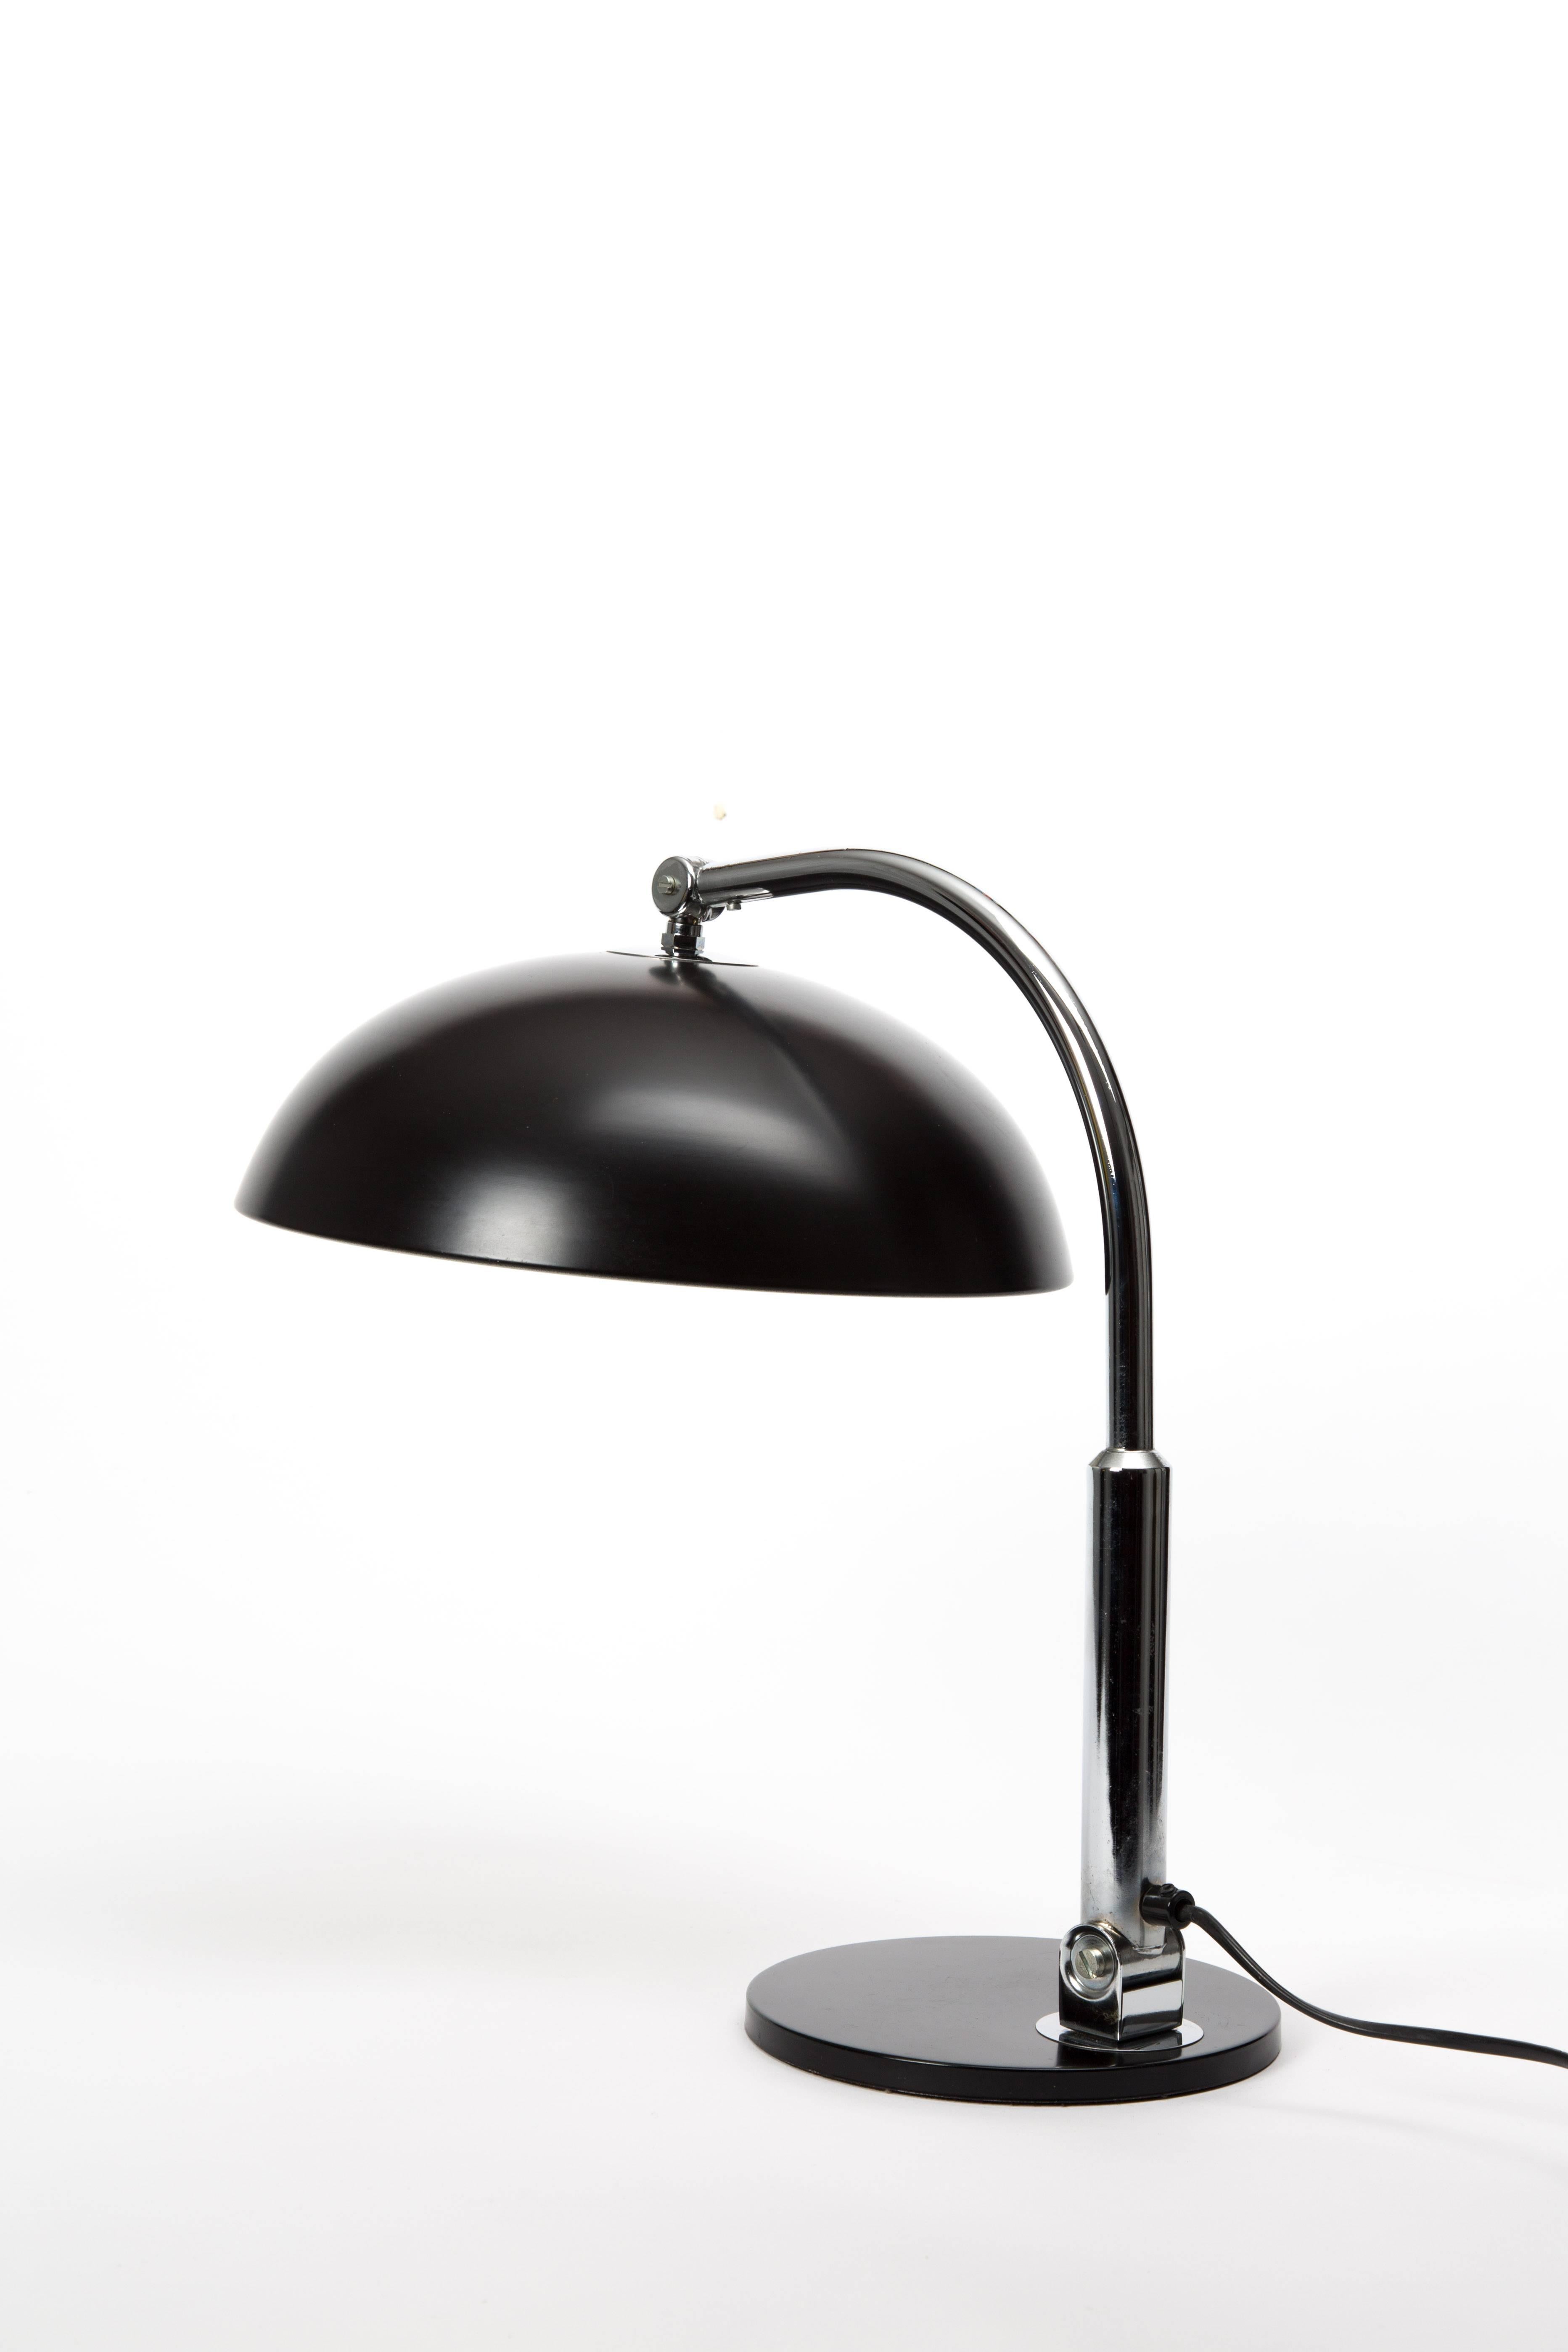 Hala Zeist. Table lamp by J.Busquet. Black painted hat. chrome-plated frame on heavy black foot. Many constellations are possible to get the best light.
   